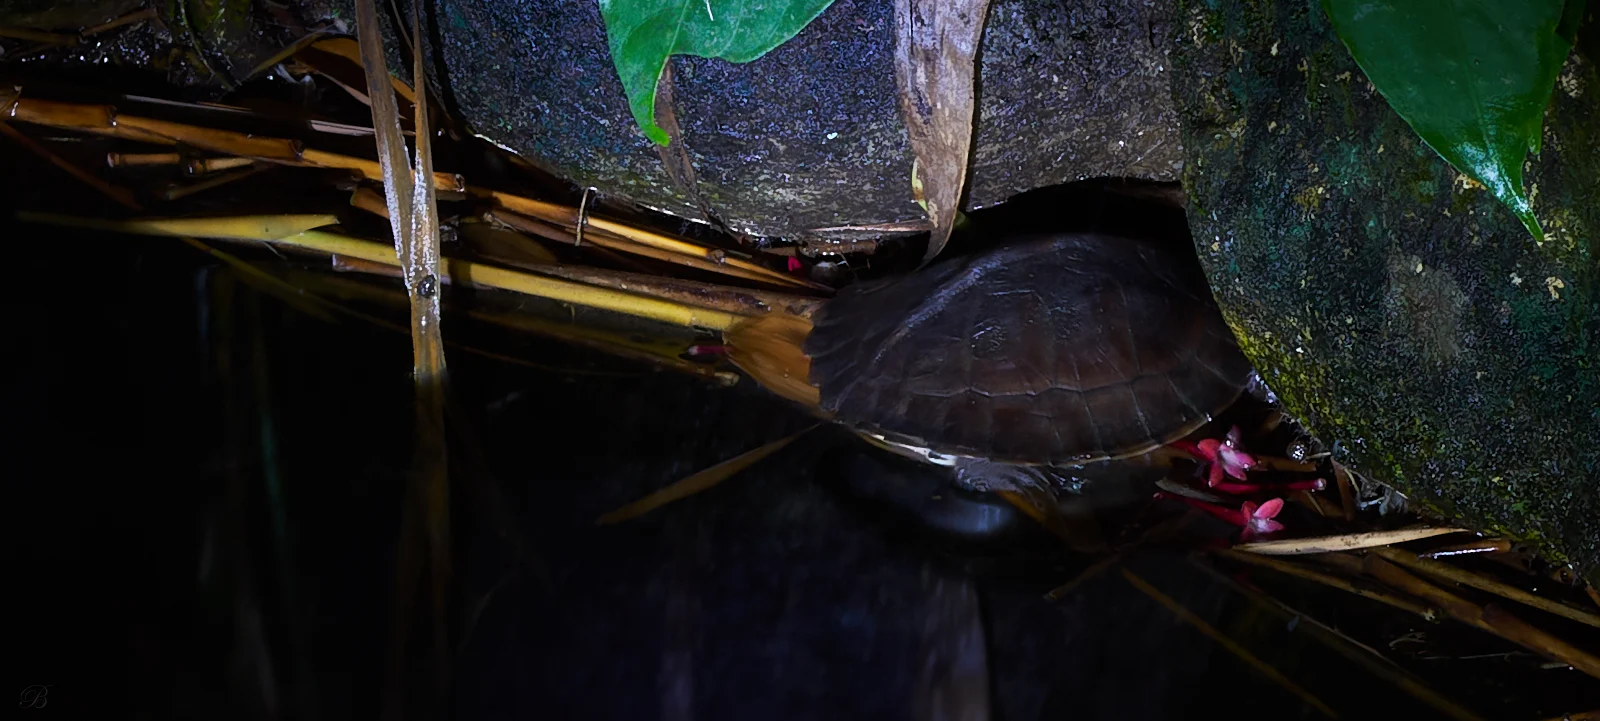 Turtles are amongst the shyest beings in our garden. Even at night they tend to hide. 